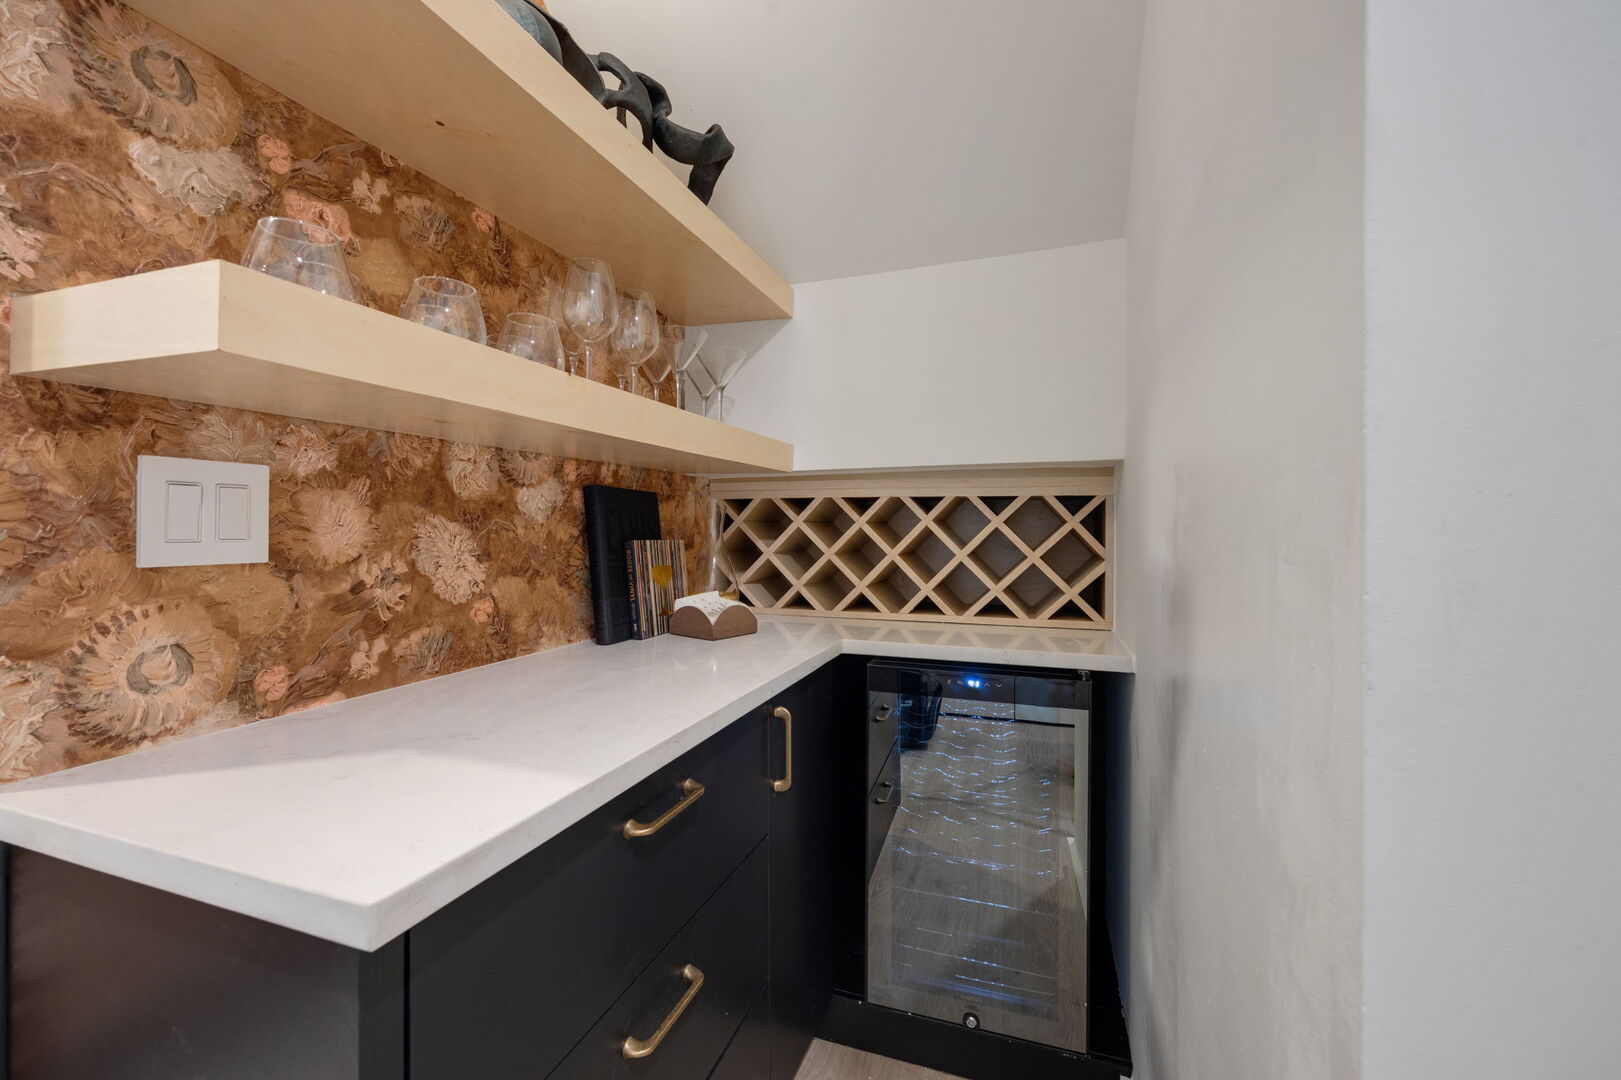 Main Level: Mini bar area under the stairs with a small fridge.